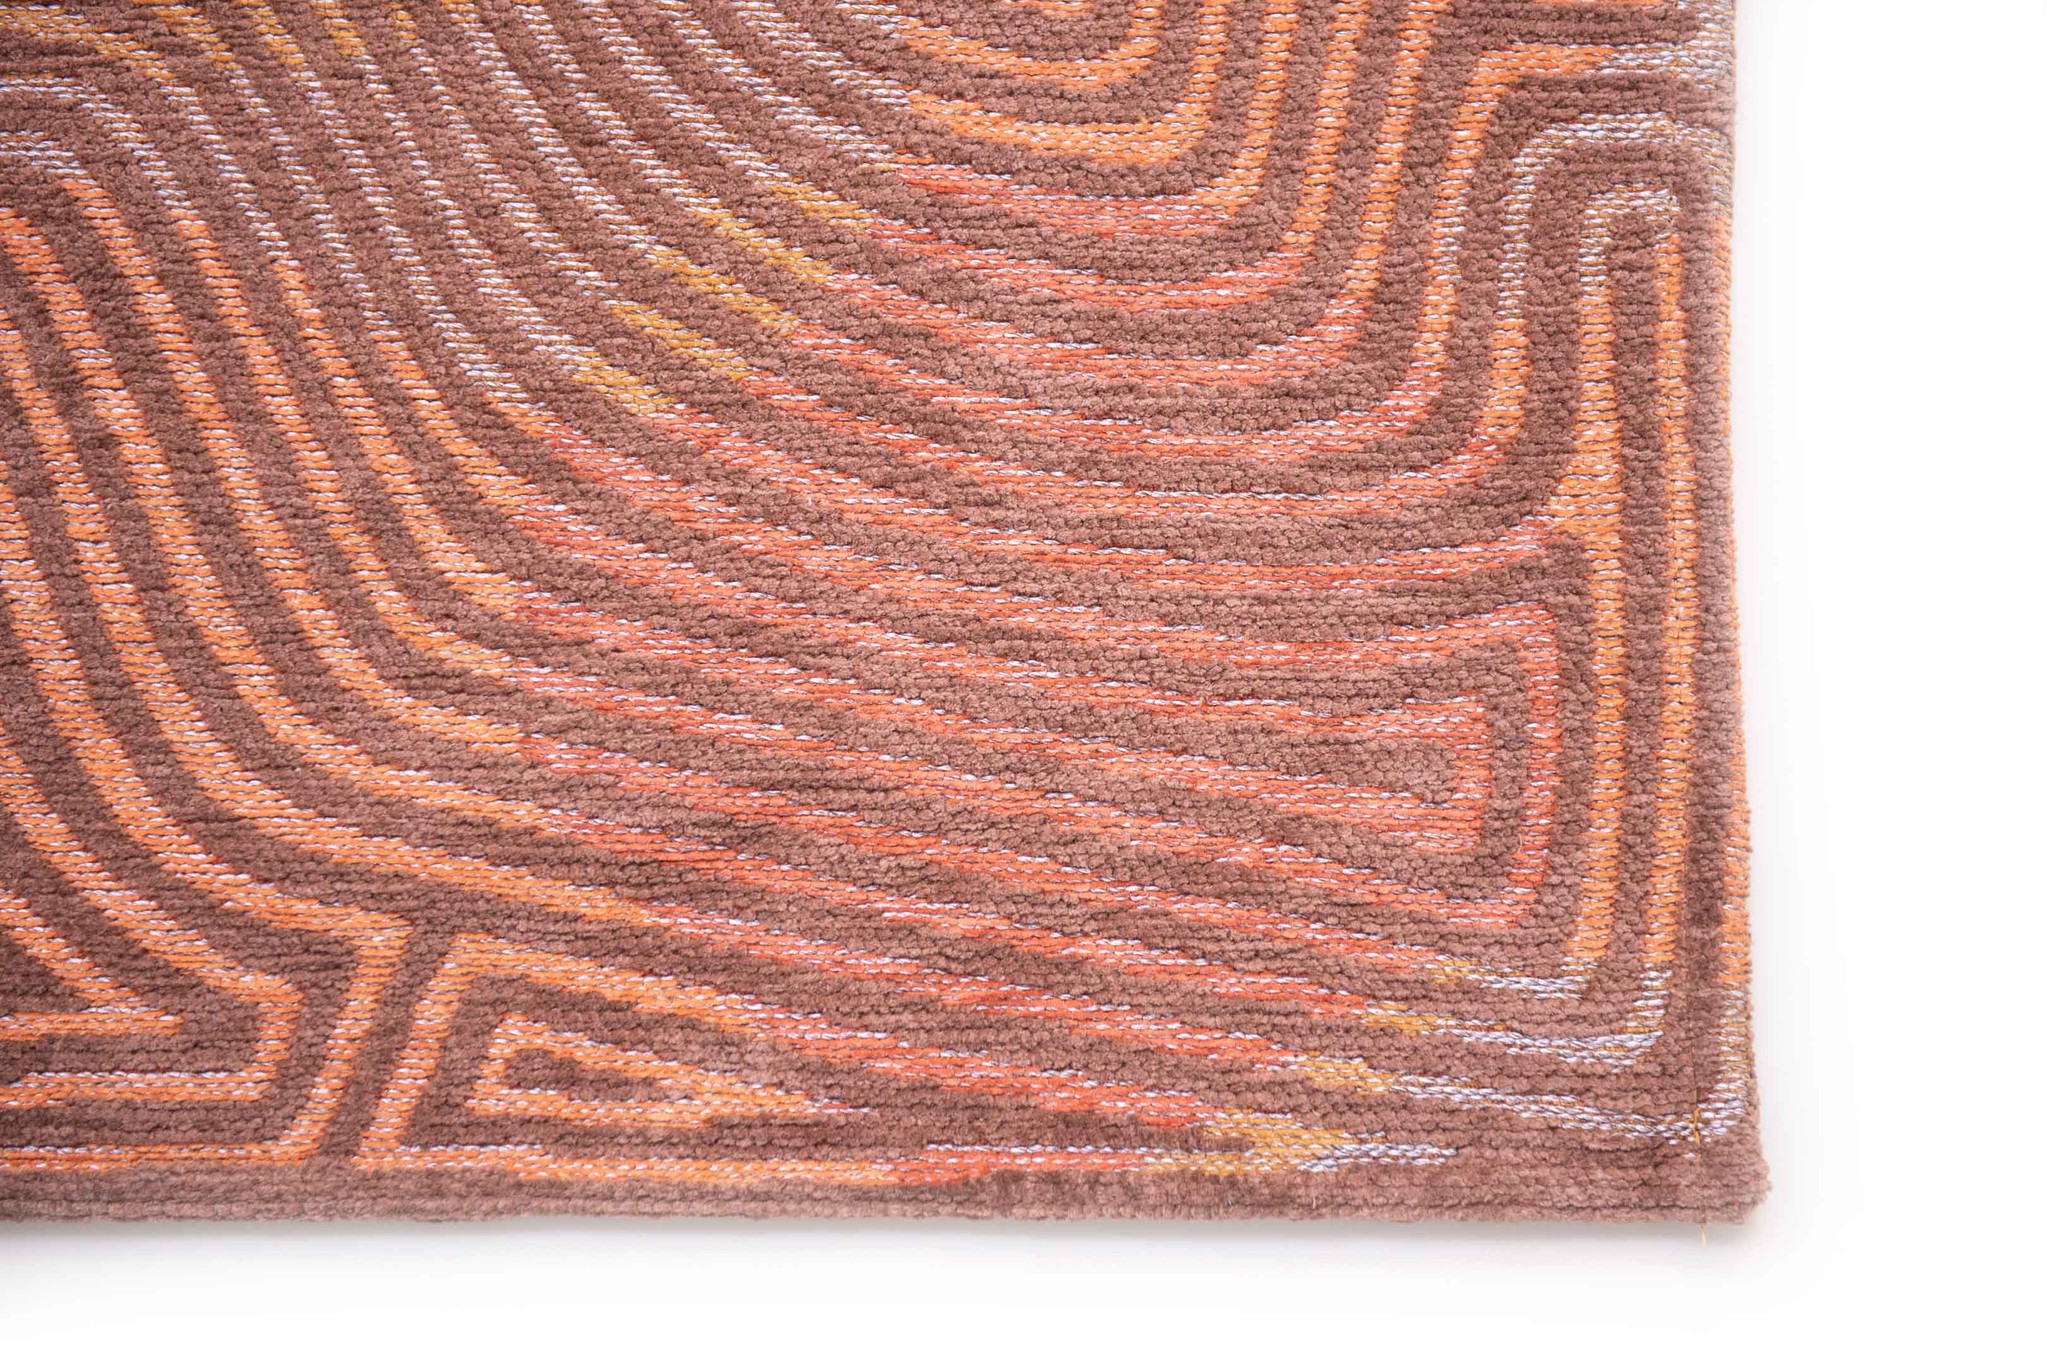 Brown Waves Flatwoven Rug ☞ Size: 9' 2" x 13' (280 x 390 cm)